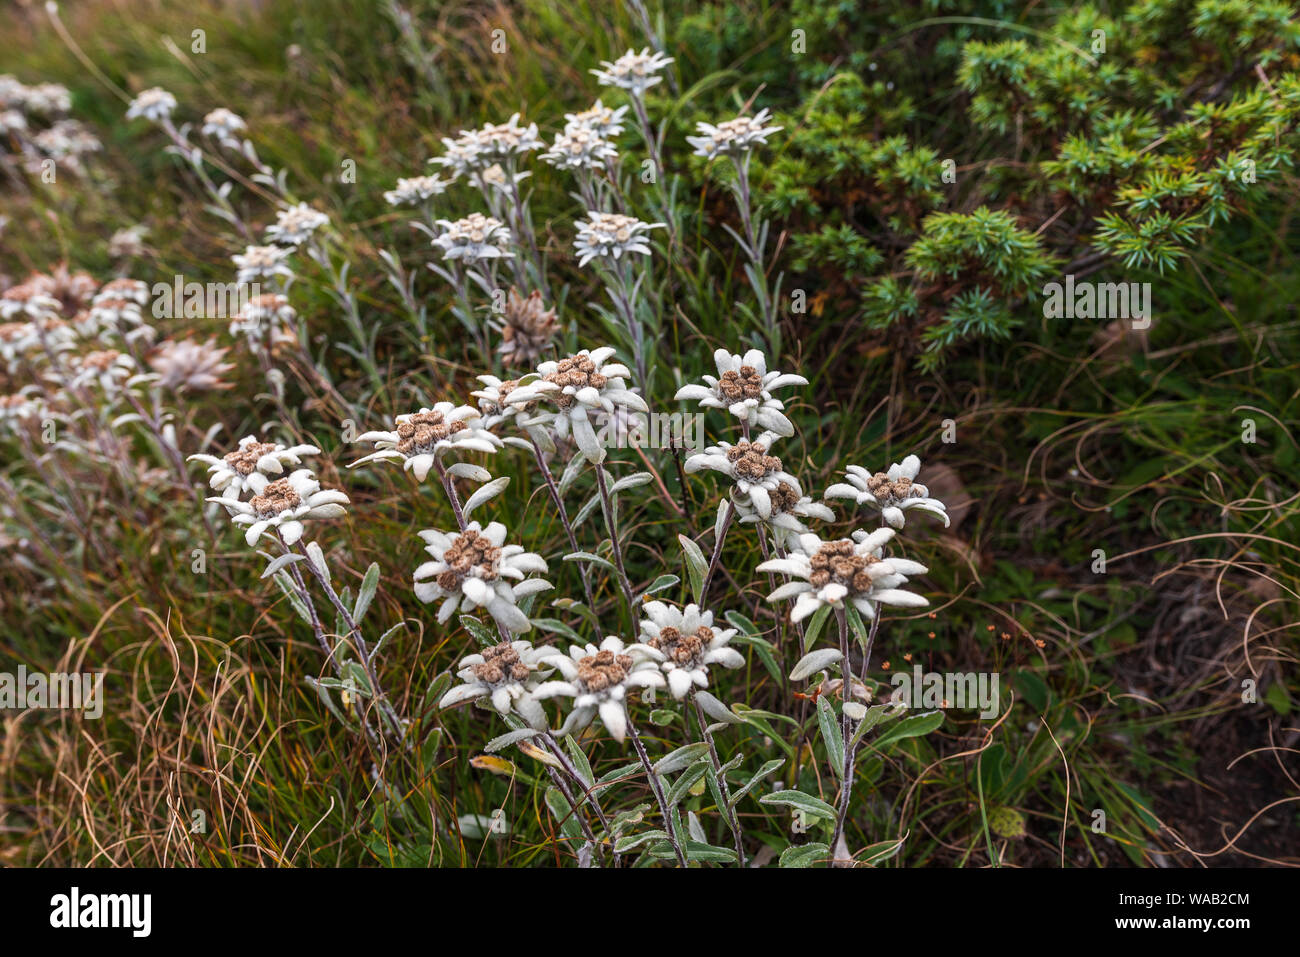 Leontopodium nivale, commonly called Edelweiss - famous protected mountain flower Stock Photo